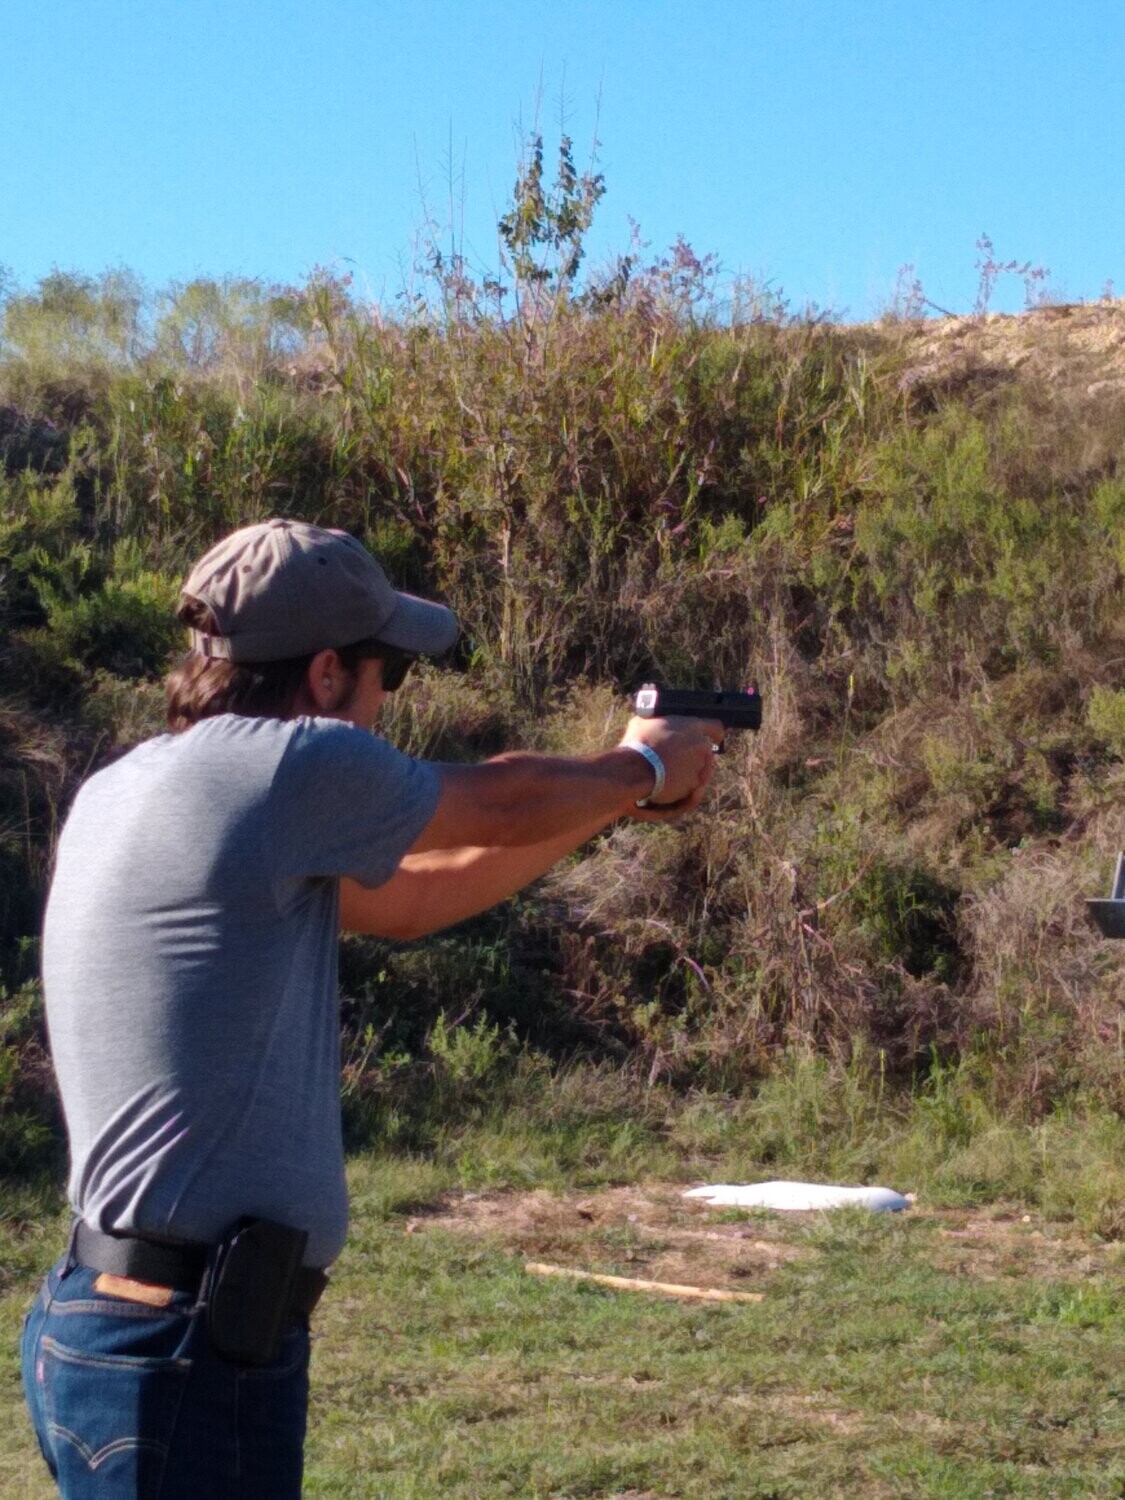 4 Day Pistol Course